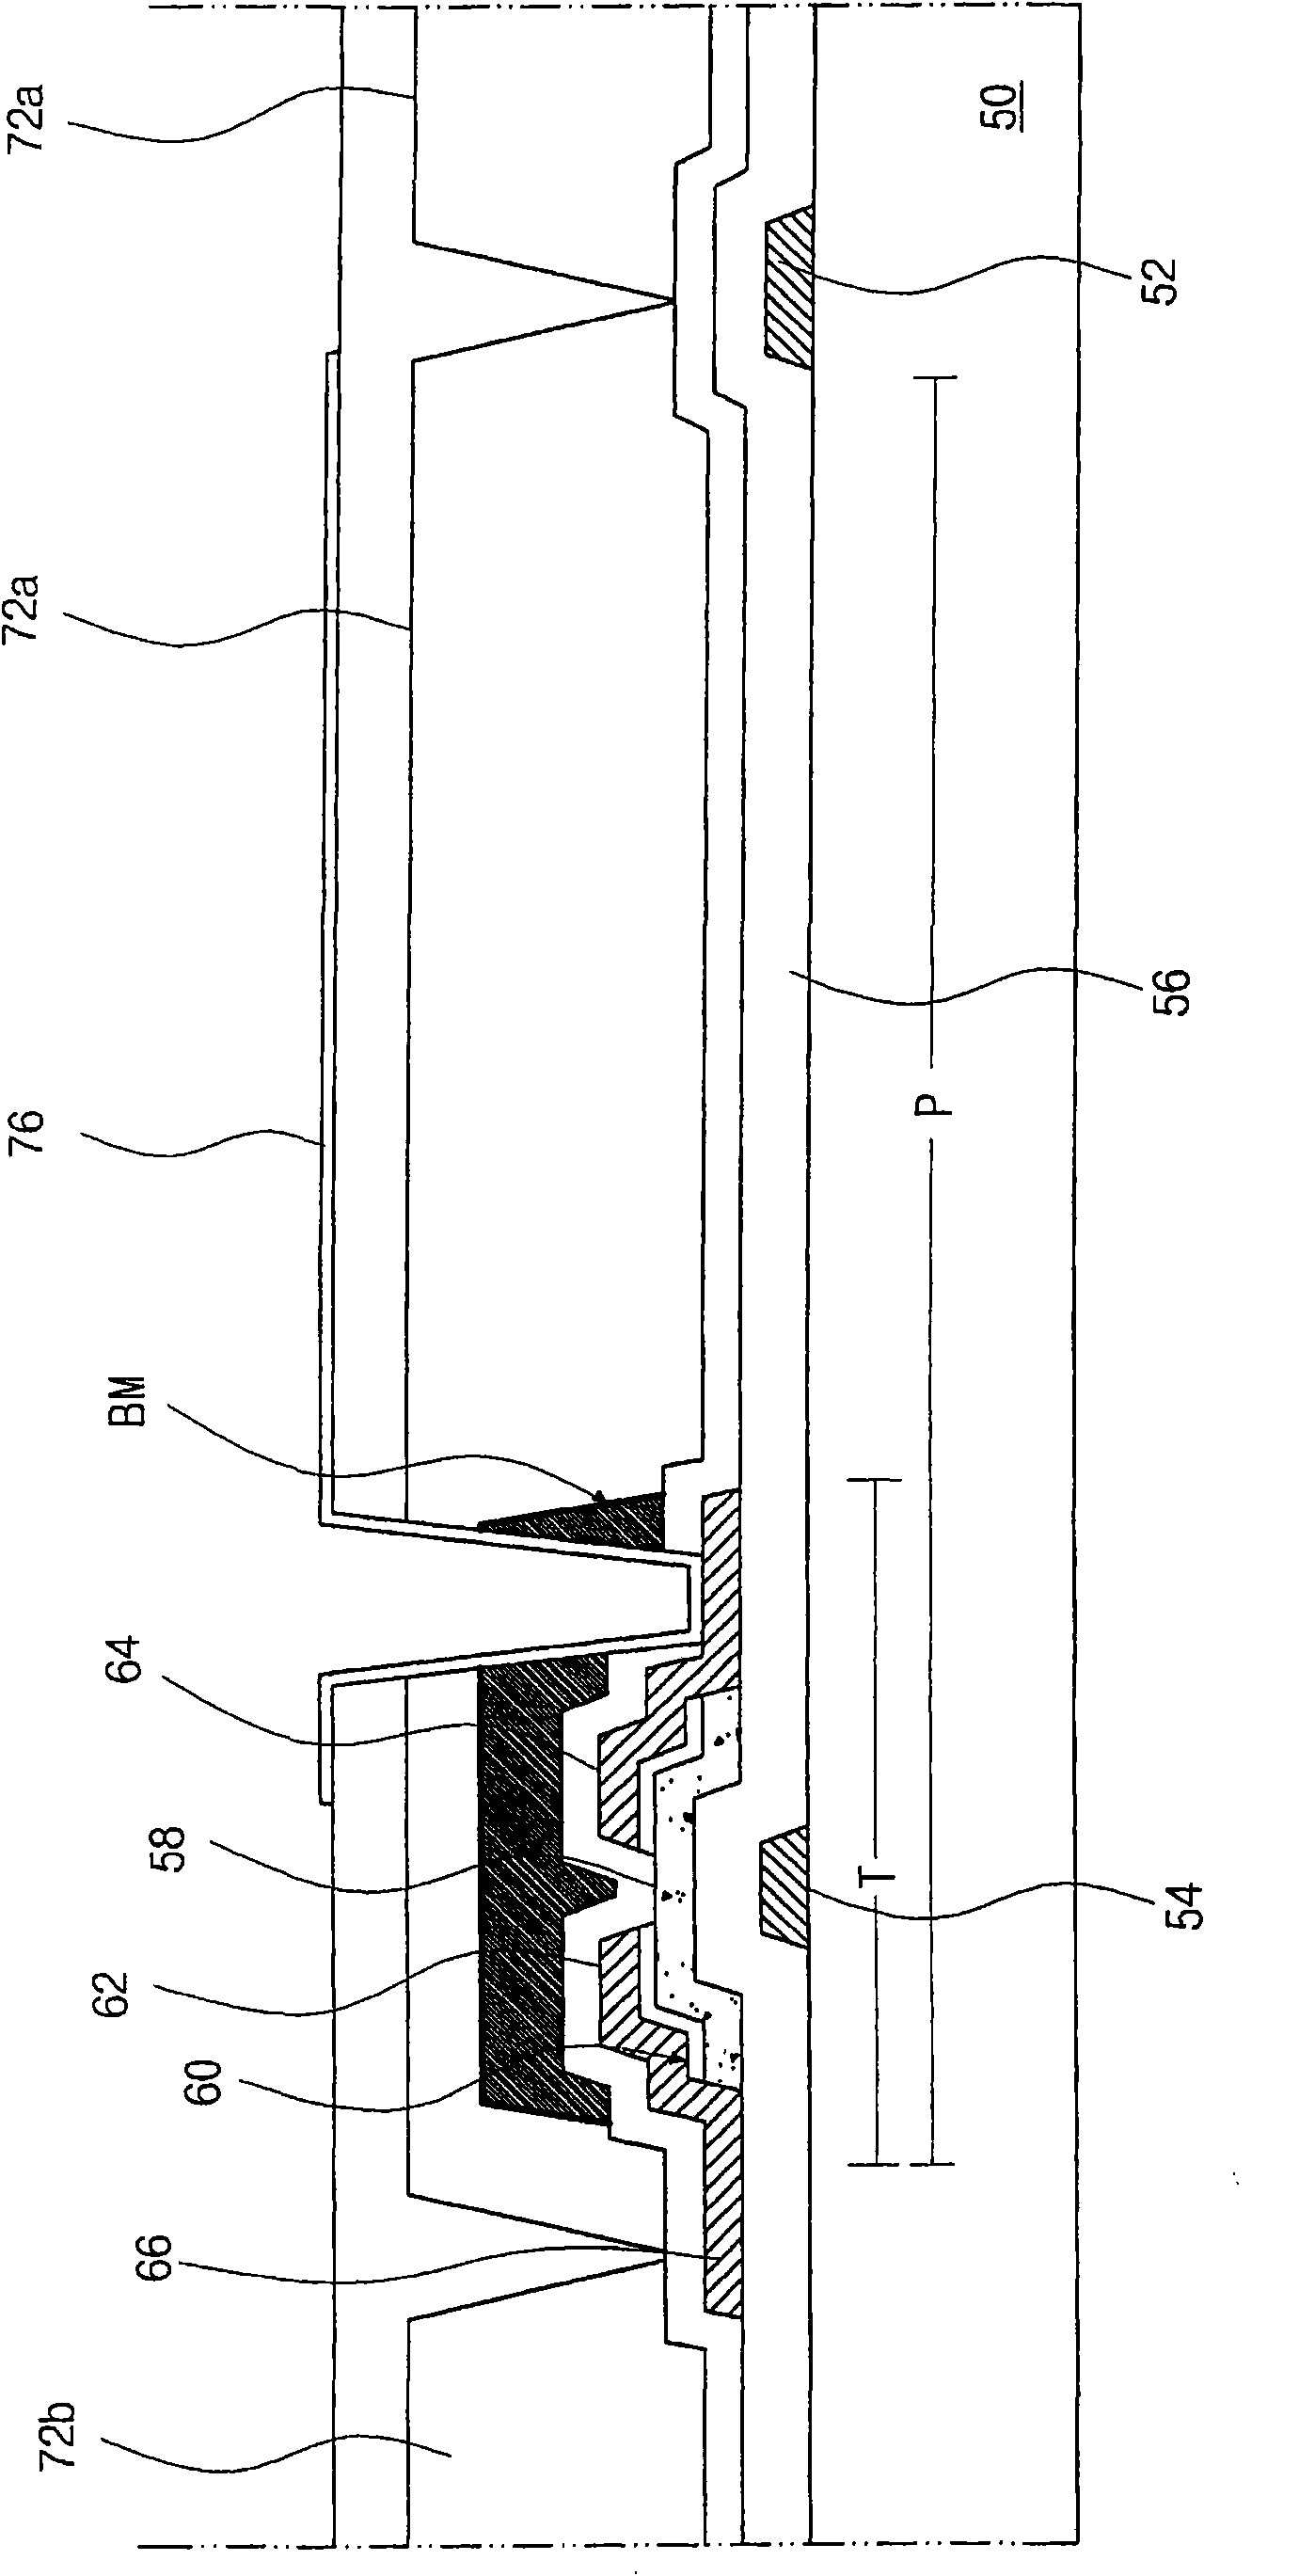 Array substrate for liquid crystal display device and manufacturing method of the same